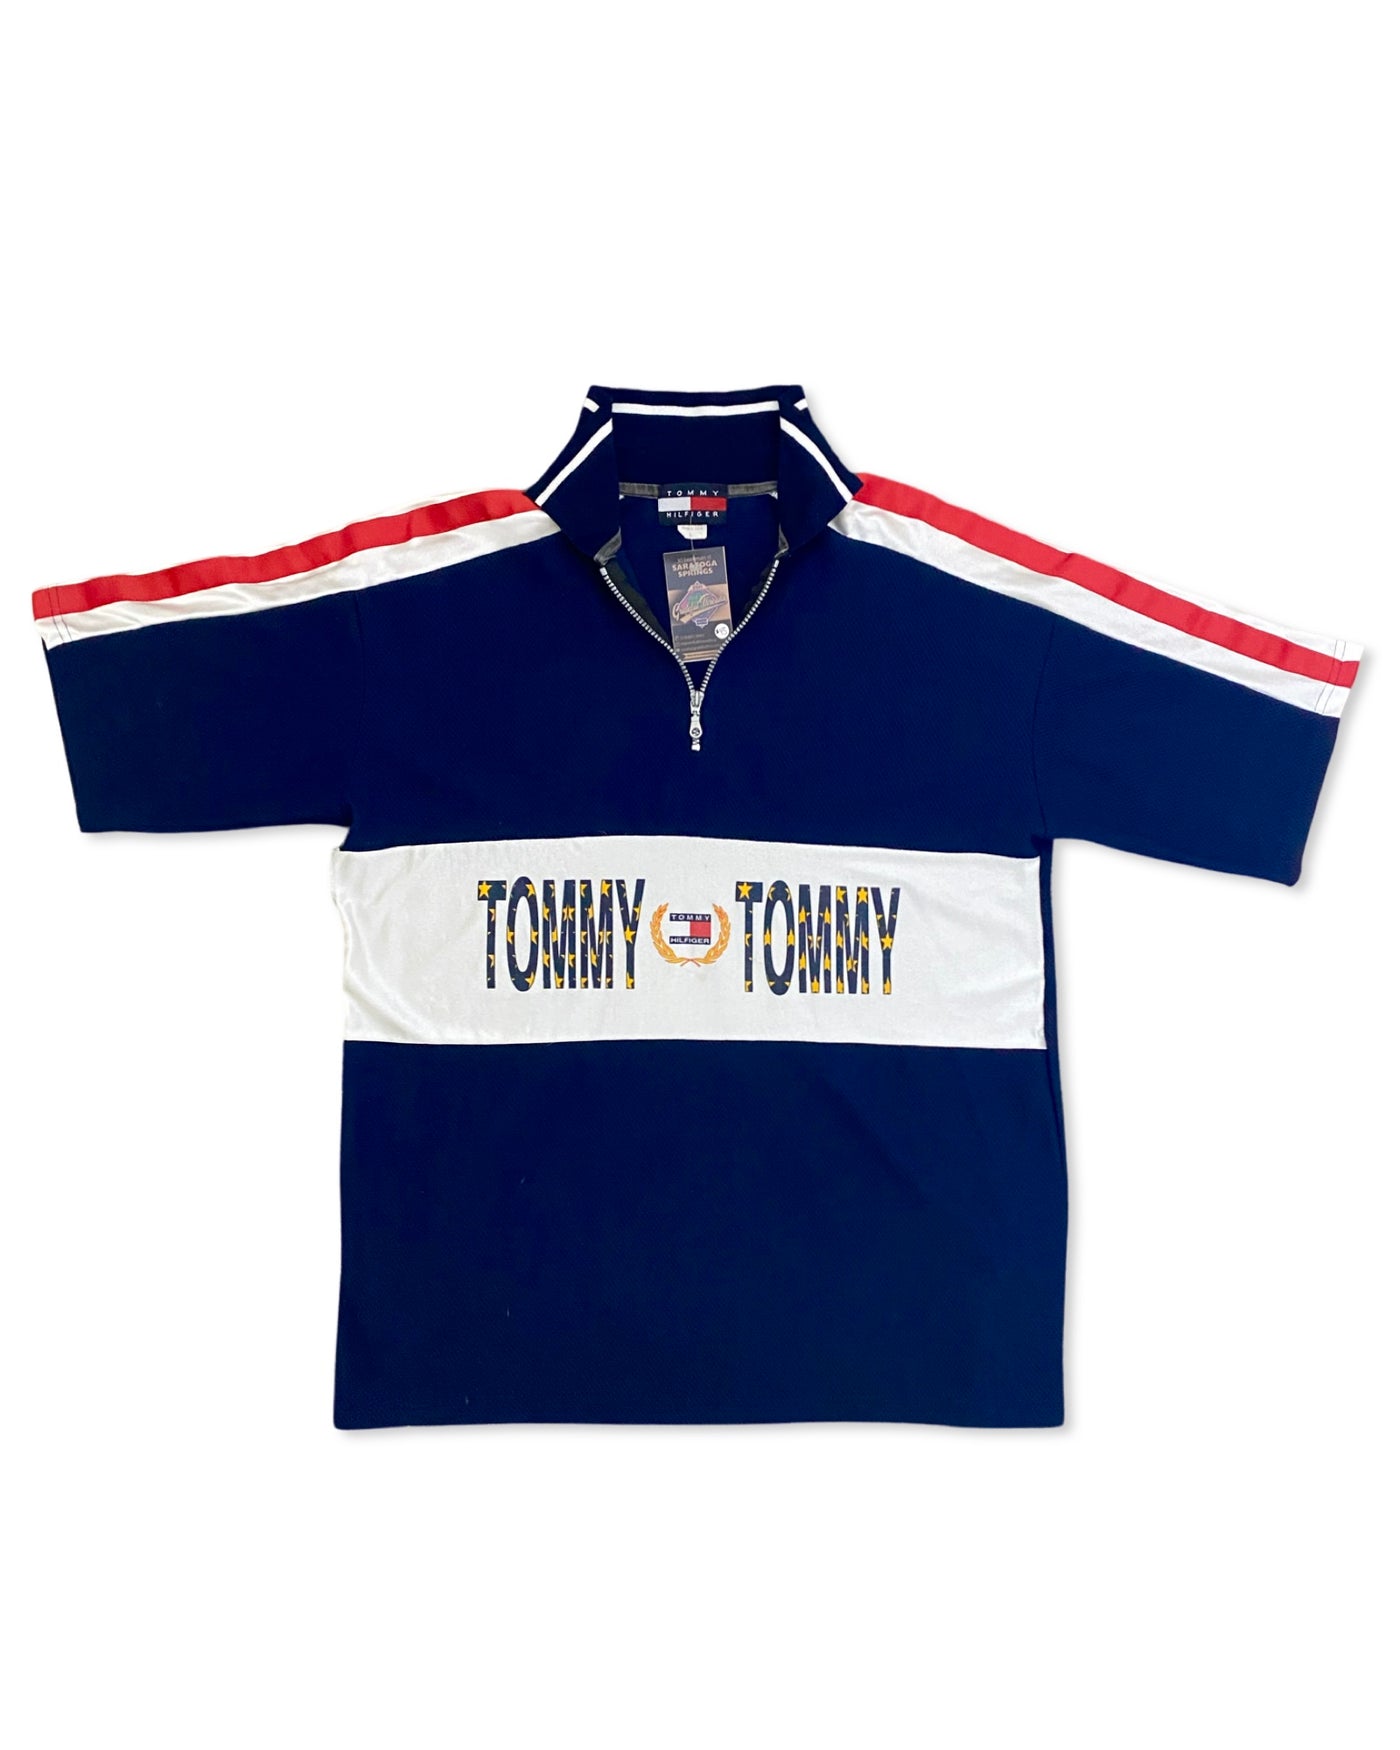 Vintage 90s Tommy Hilfiger Zip Up Polo